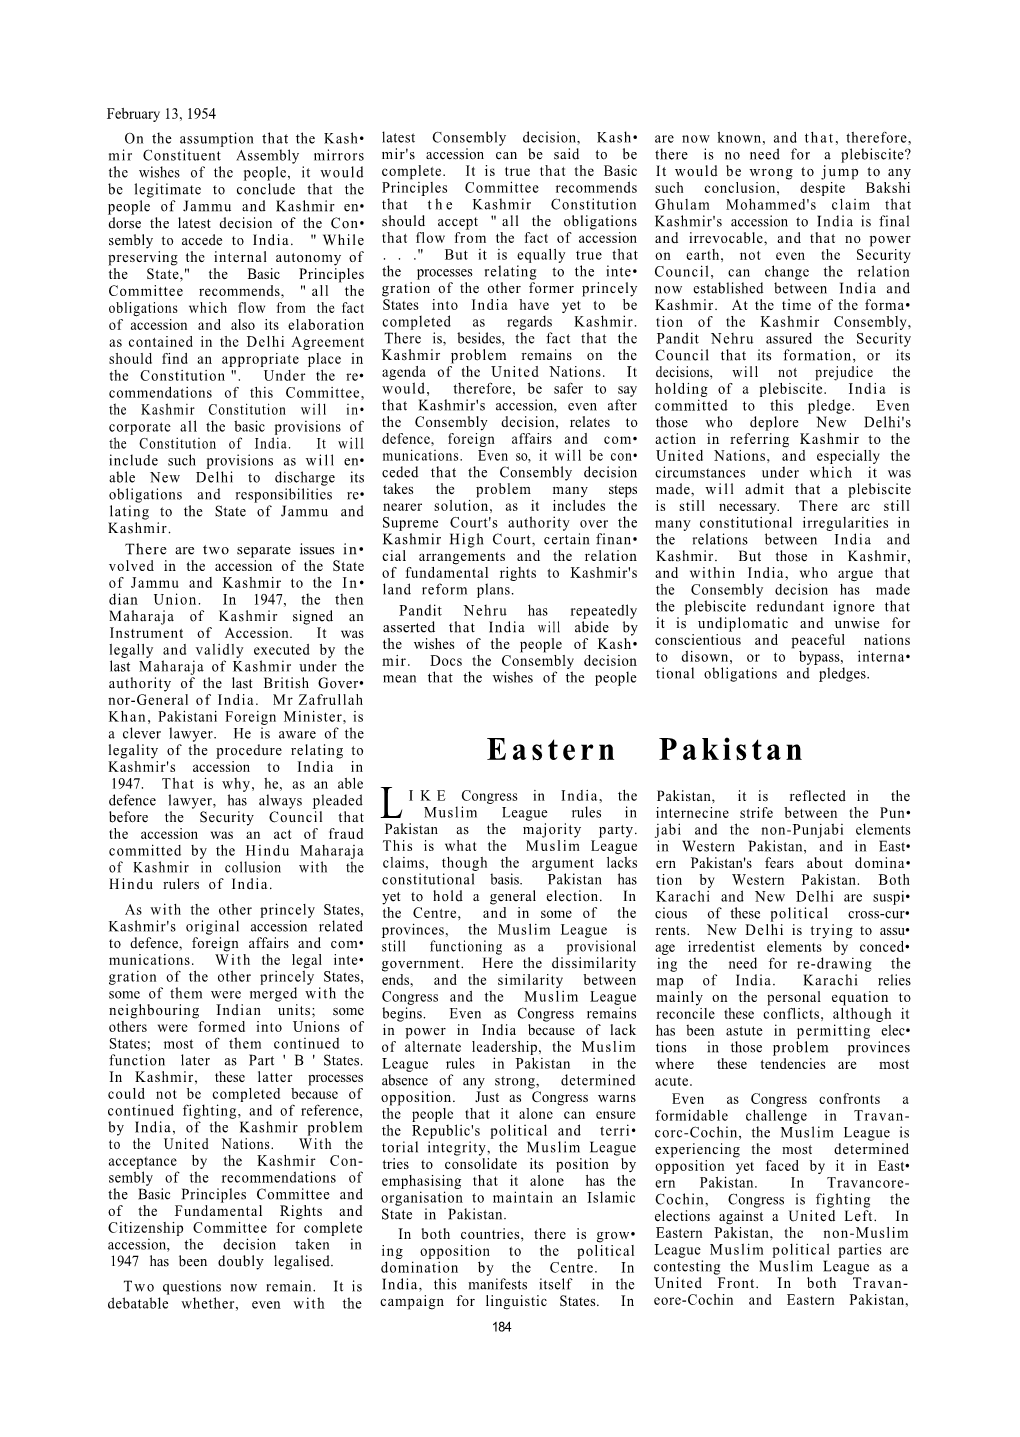 Eastern Pakistan Kashmir's Accession to India in 1947